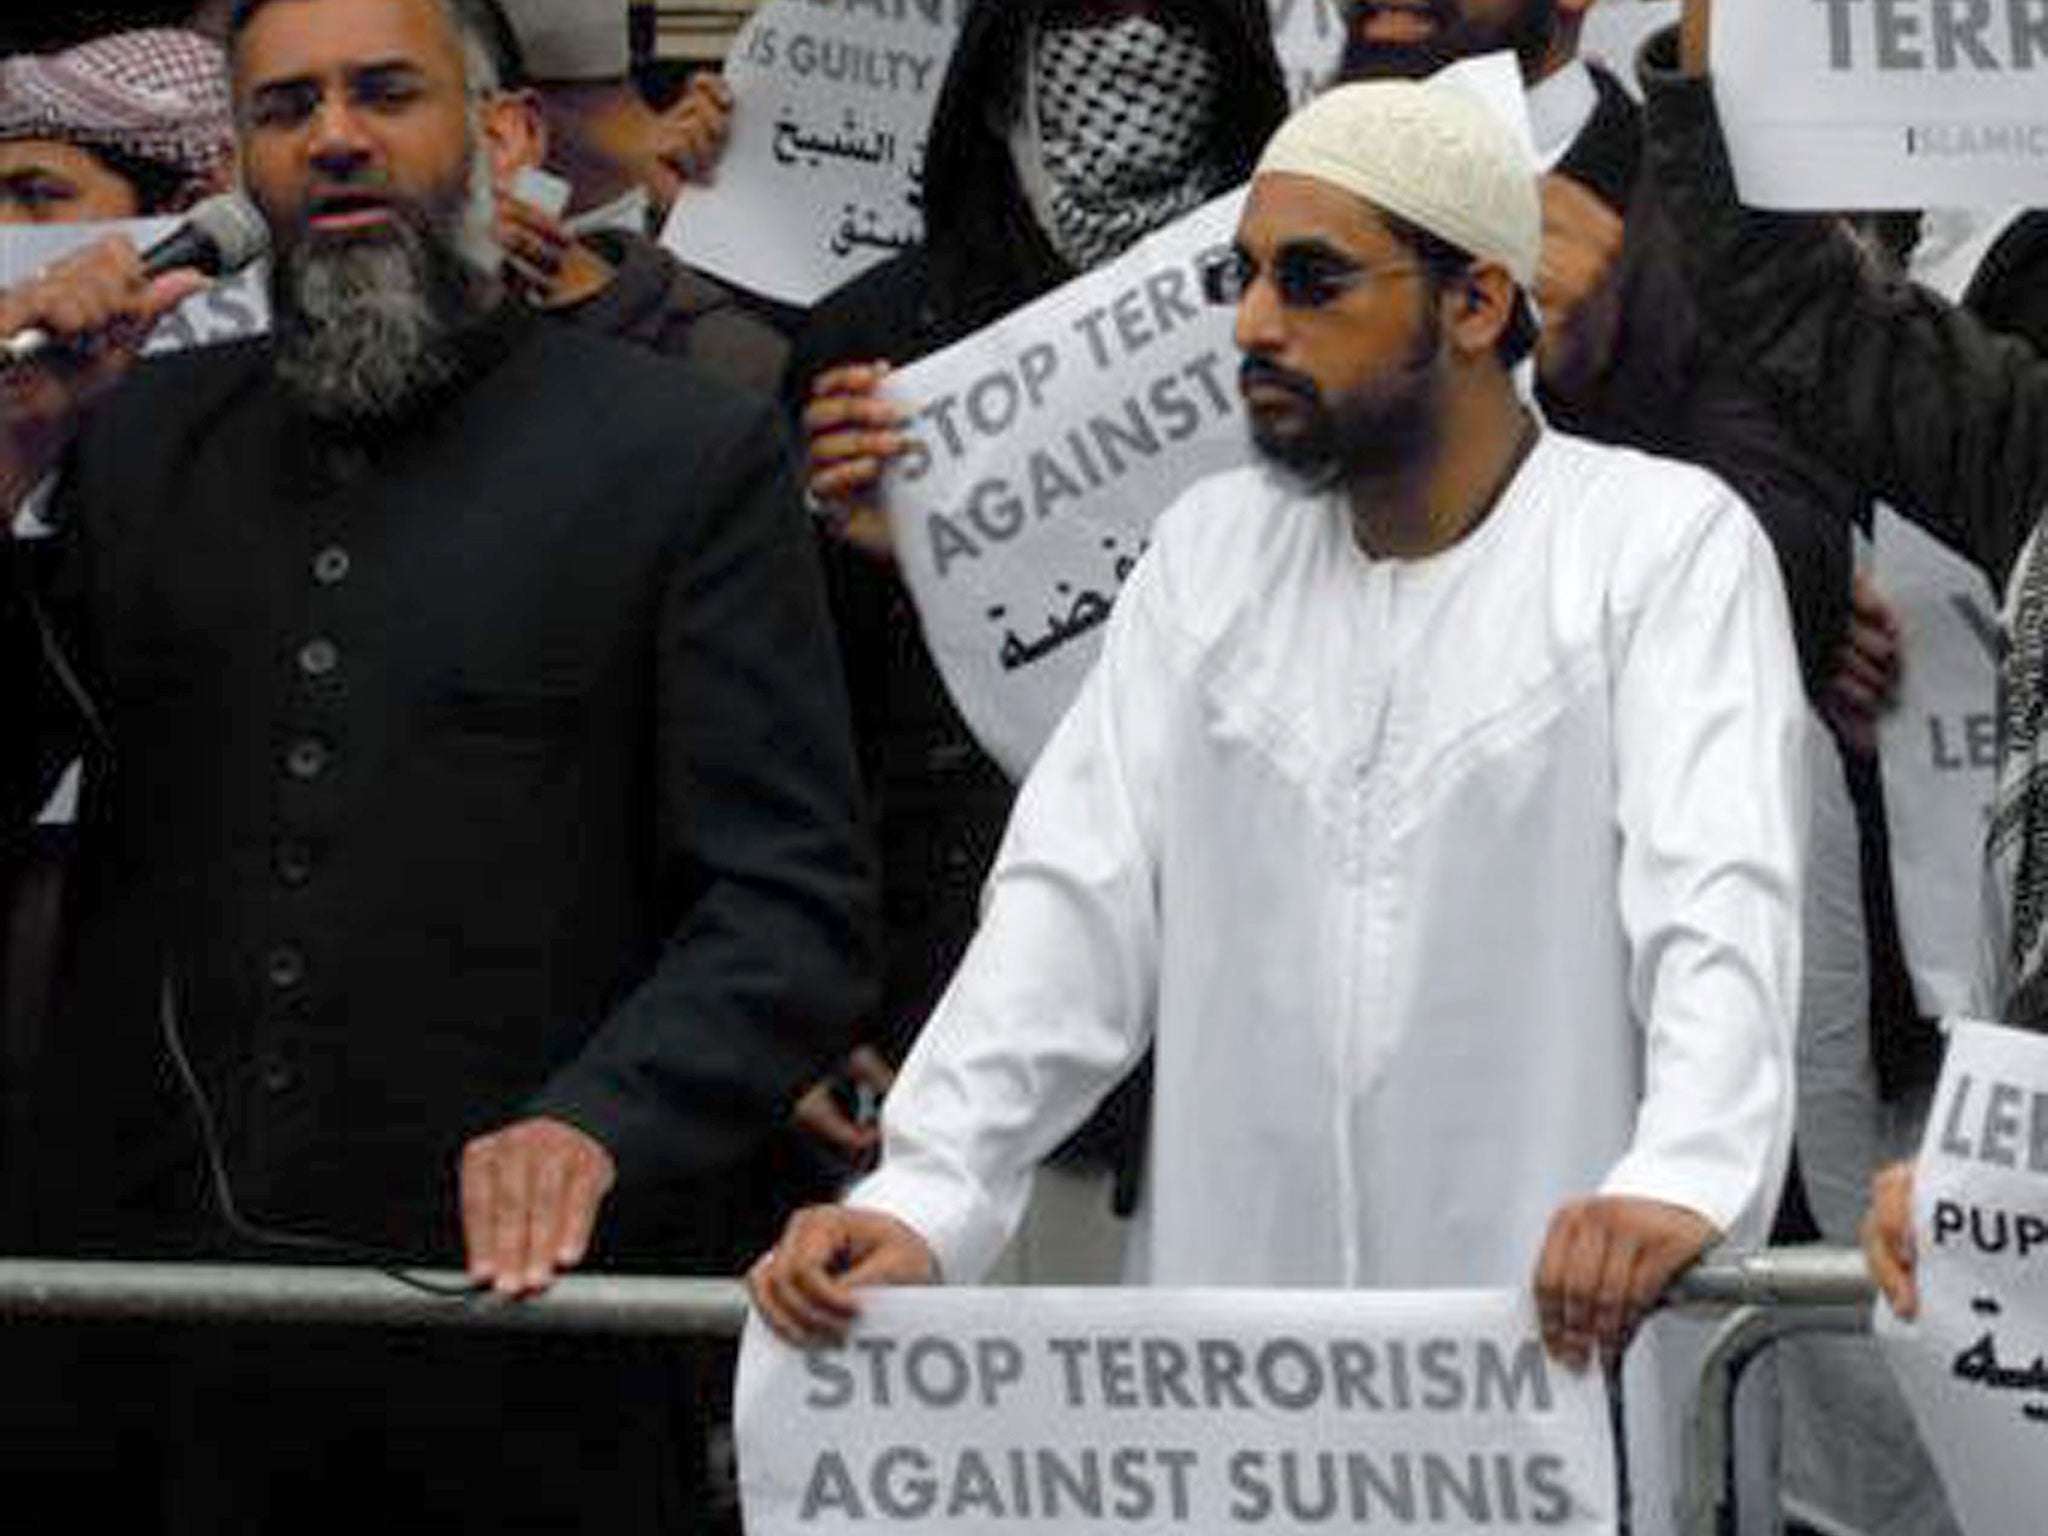 Anjem Choudary (left) and Mohammed Mizanur Rahman are facing jail after being convicted drumming up support for Isis